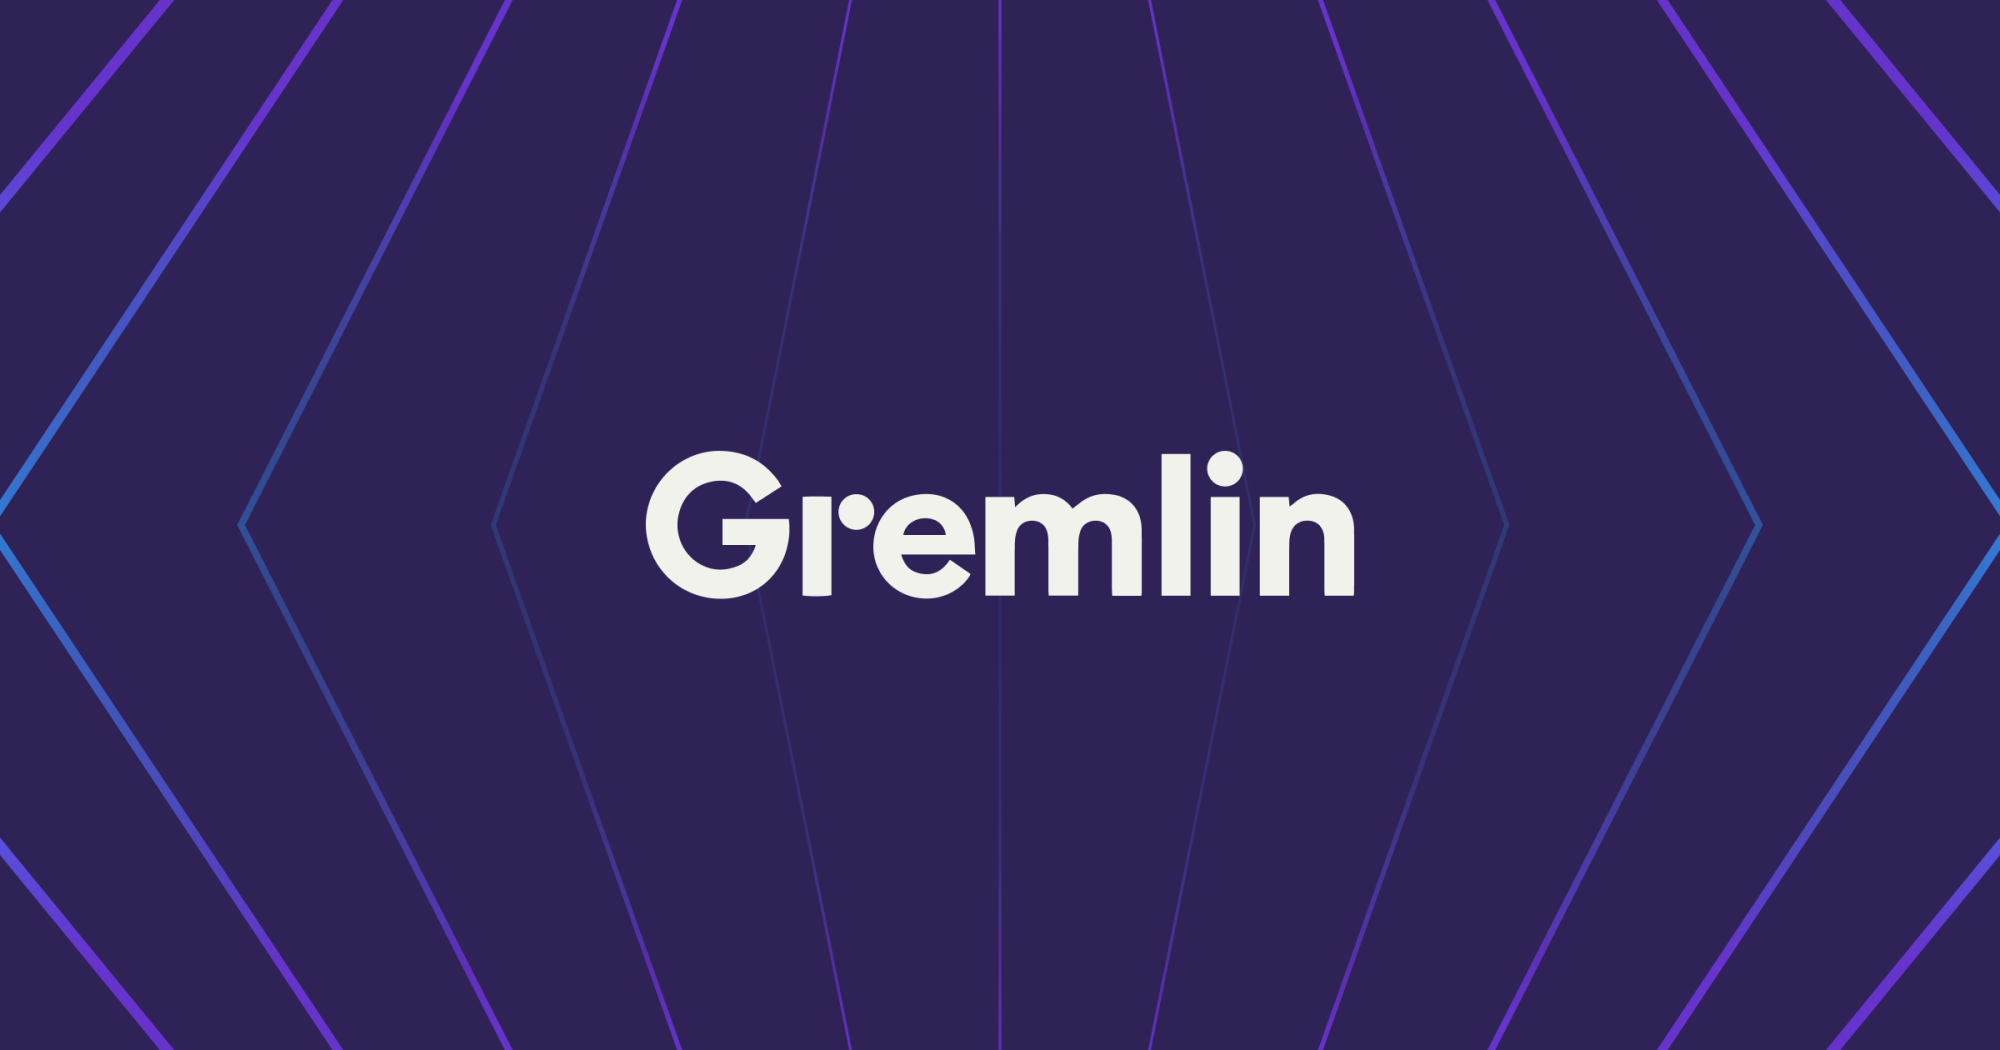 How to Install and Use Gremlin on Ubuntu 18.04